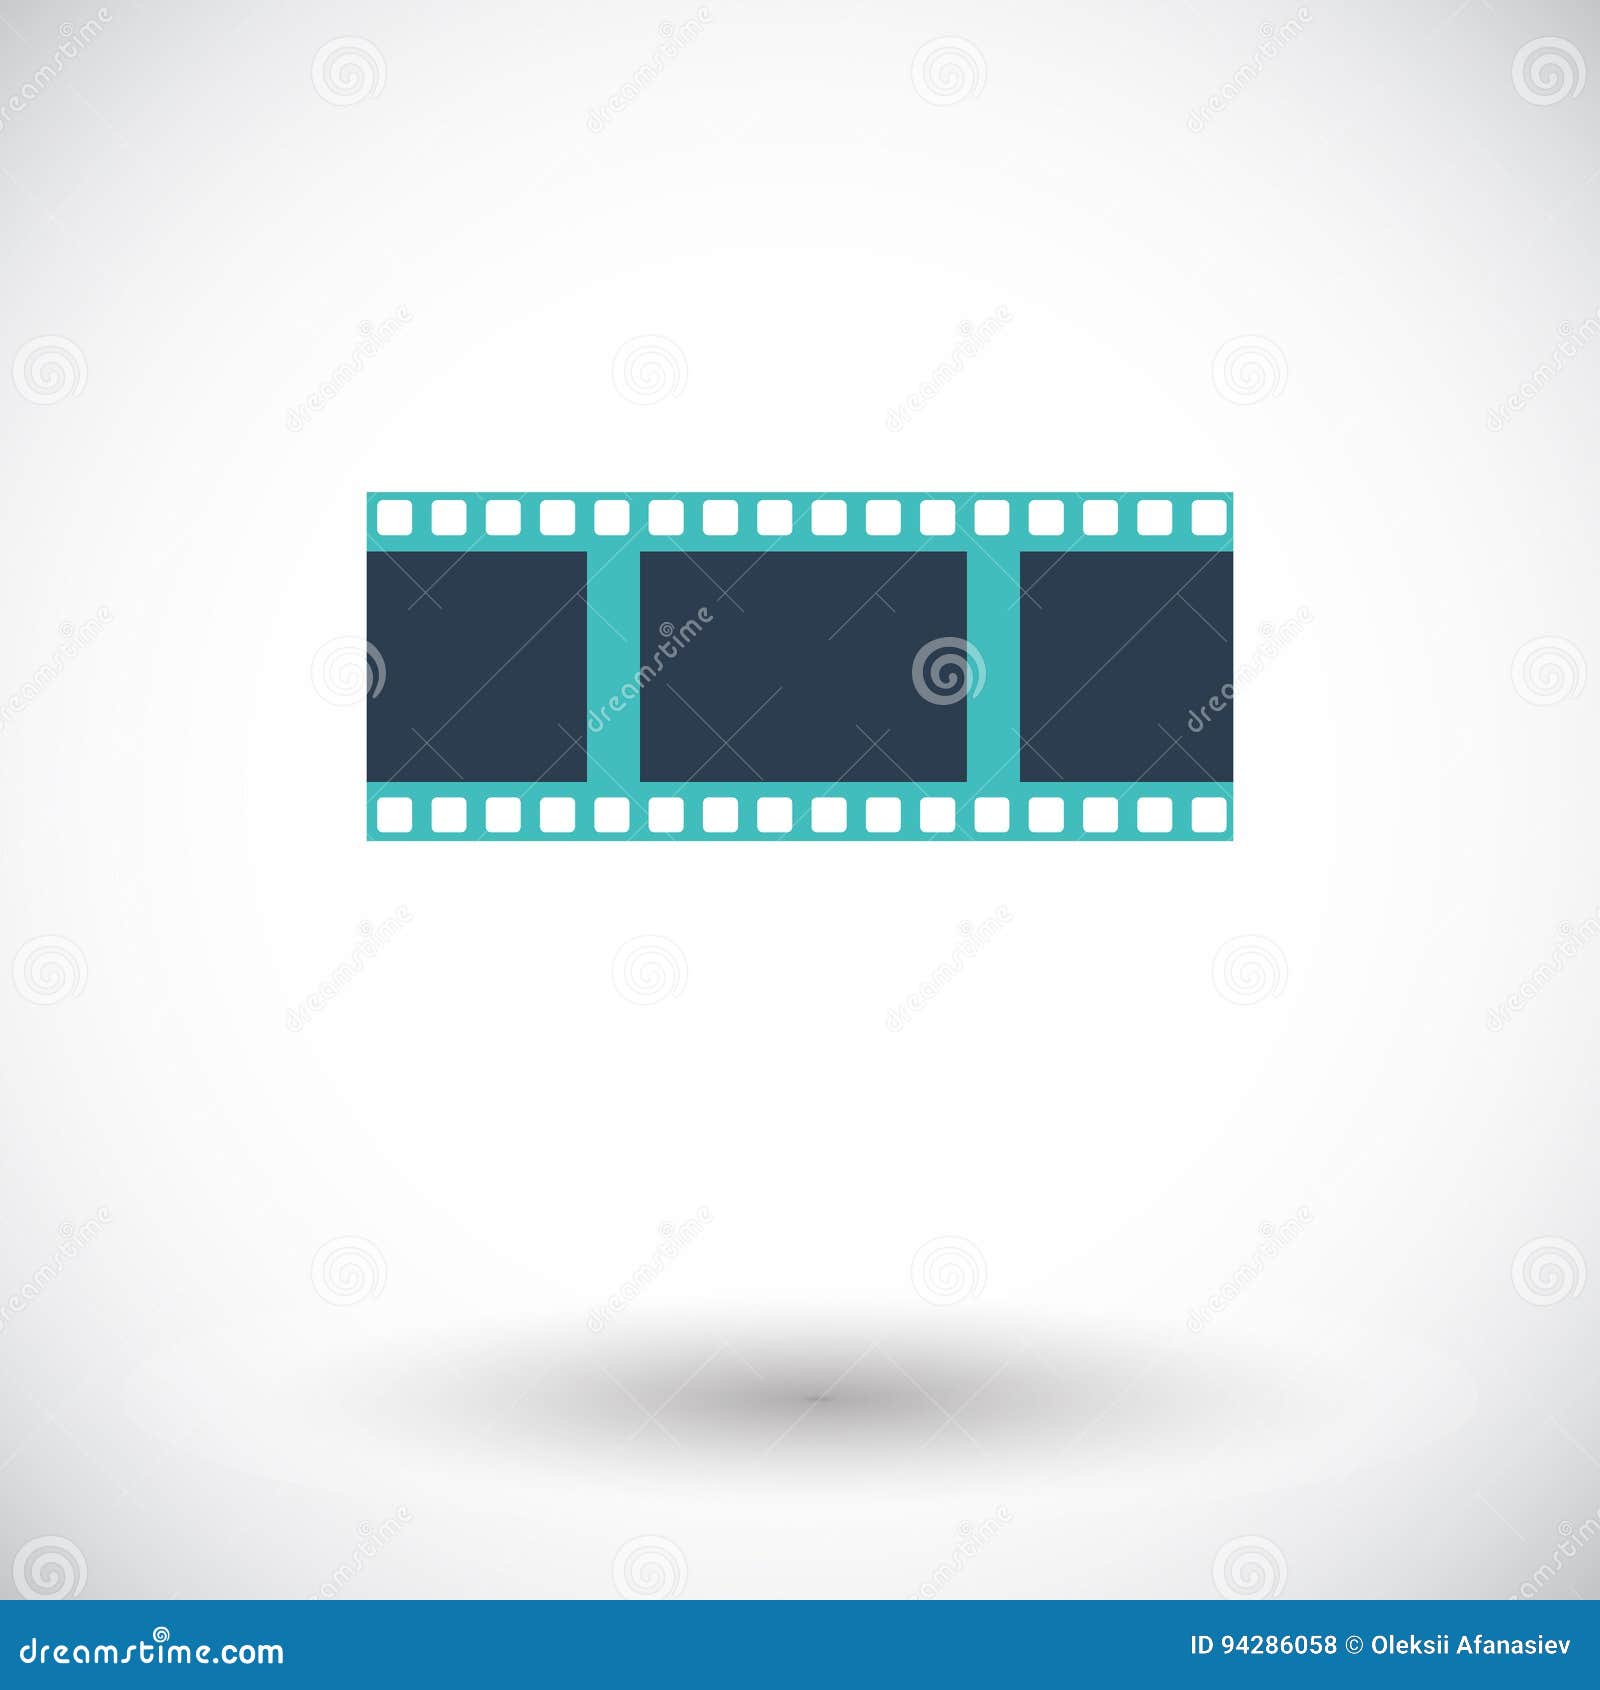 Film icon stock vector. Illustration of painting, isolated - 94286058